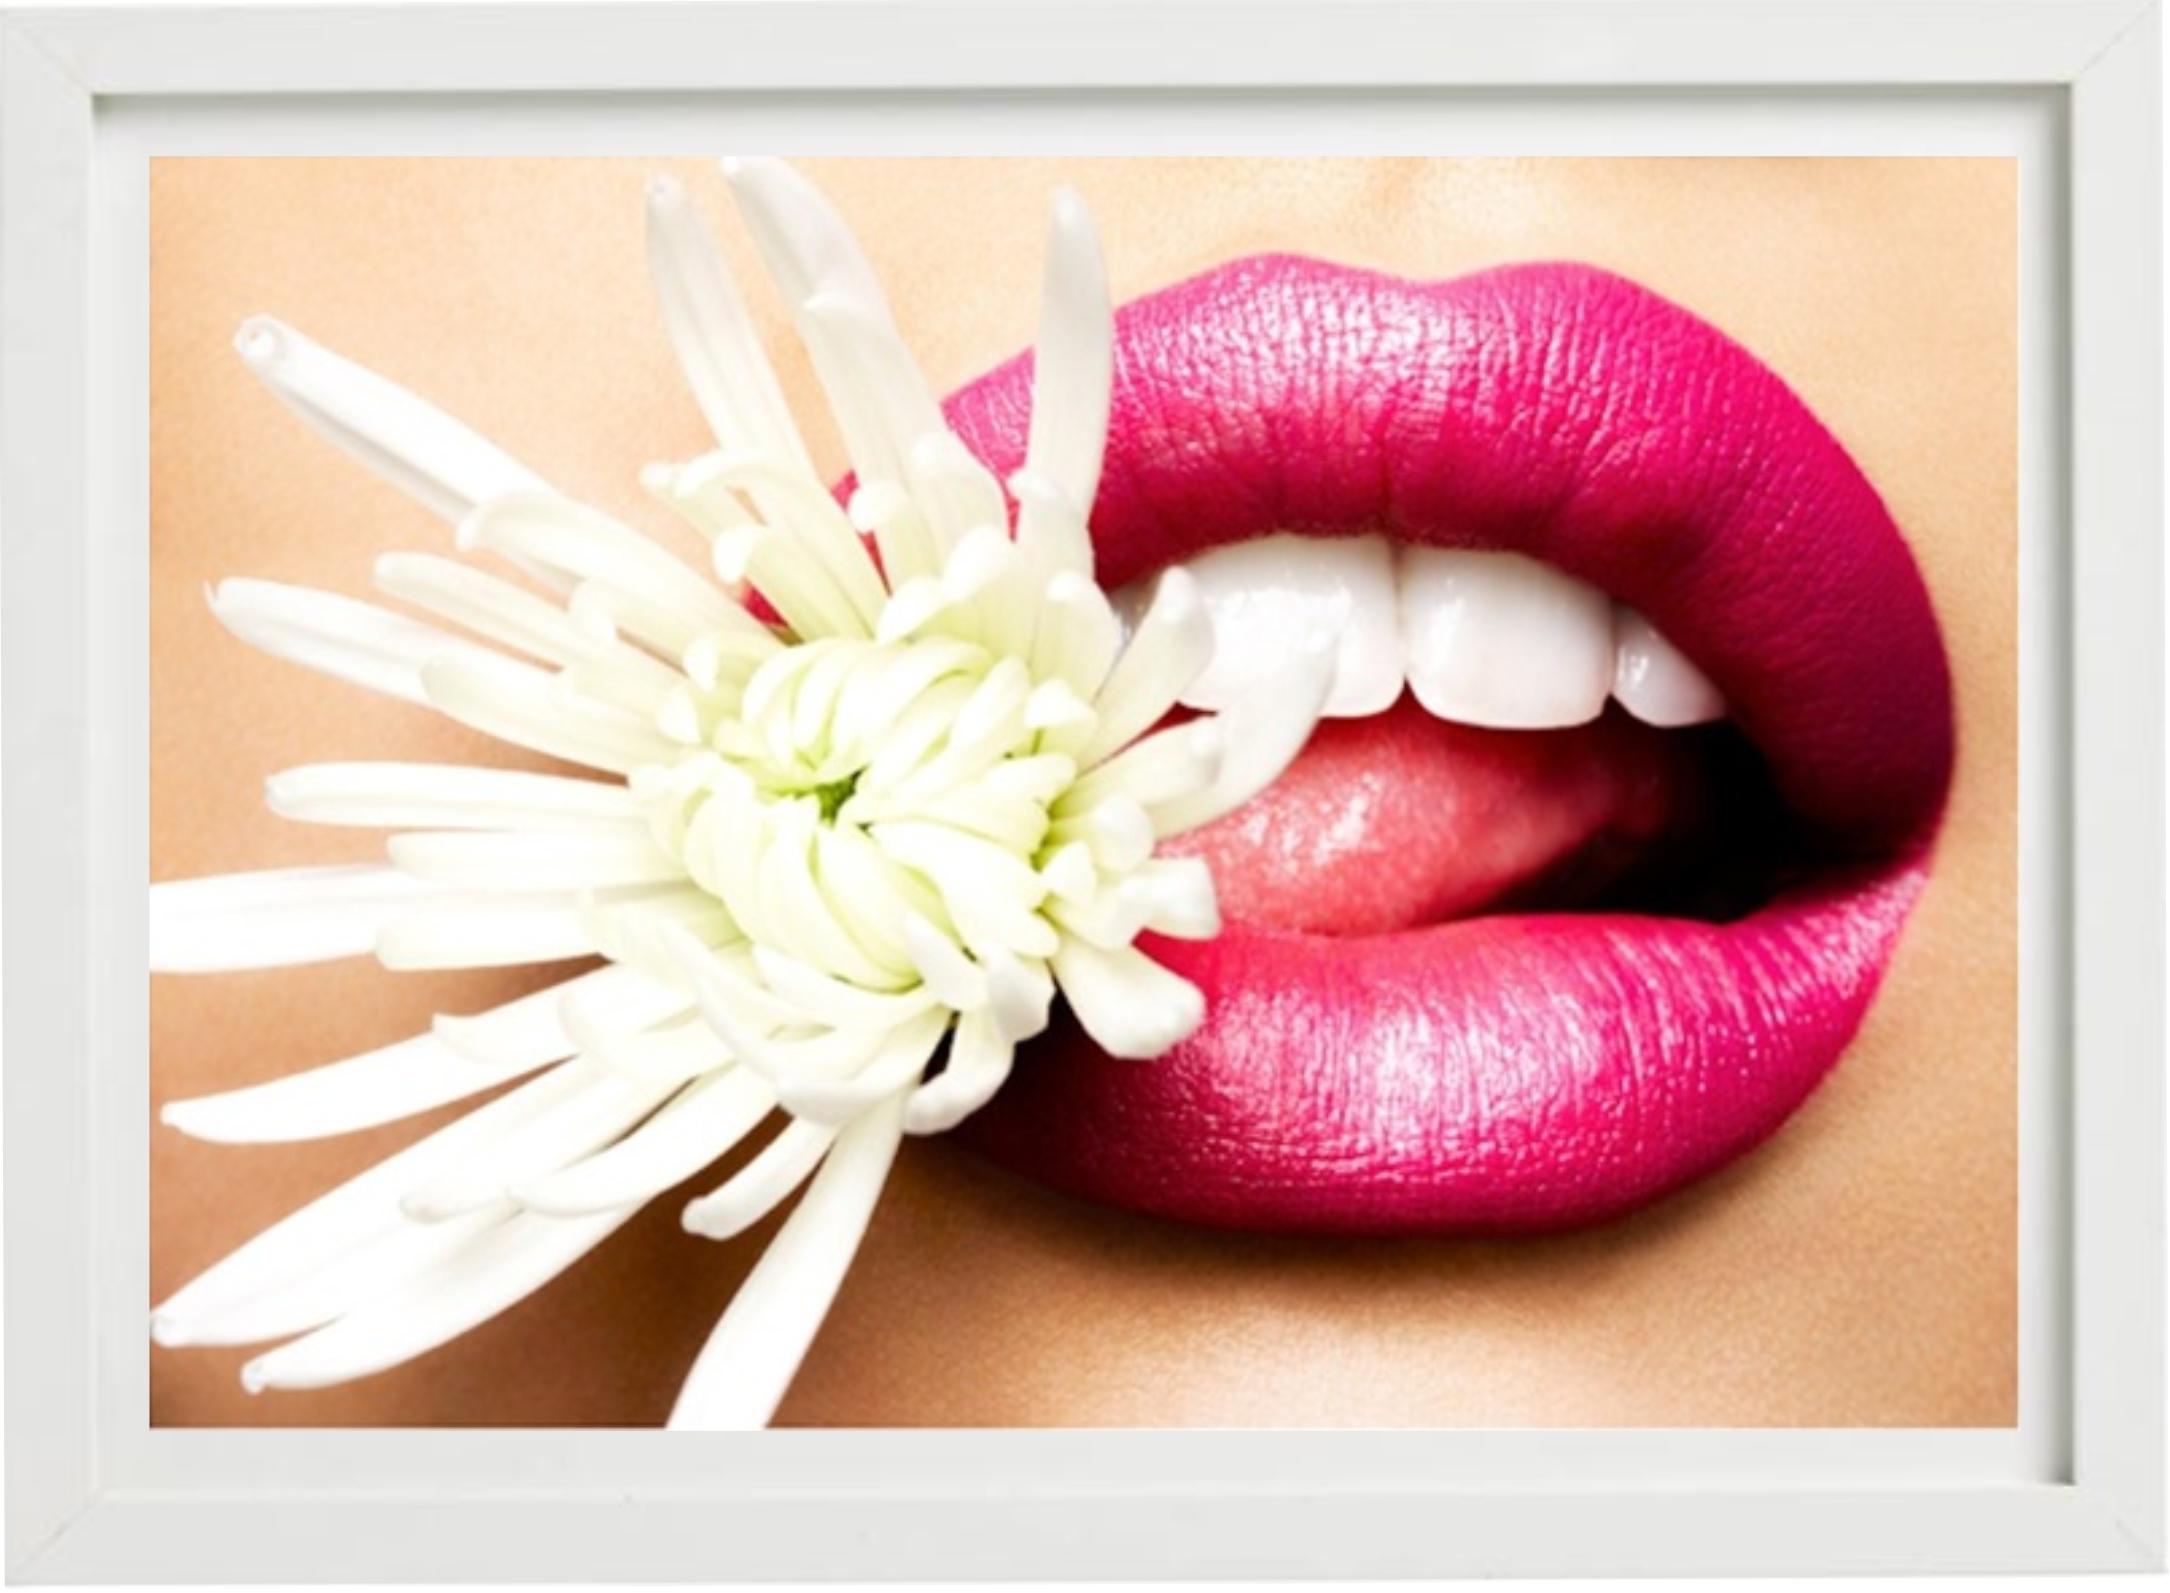 Chrysanthemum Bitten - model with pink lips biting a white flower - Photograph by Rankin